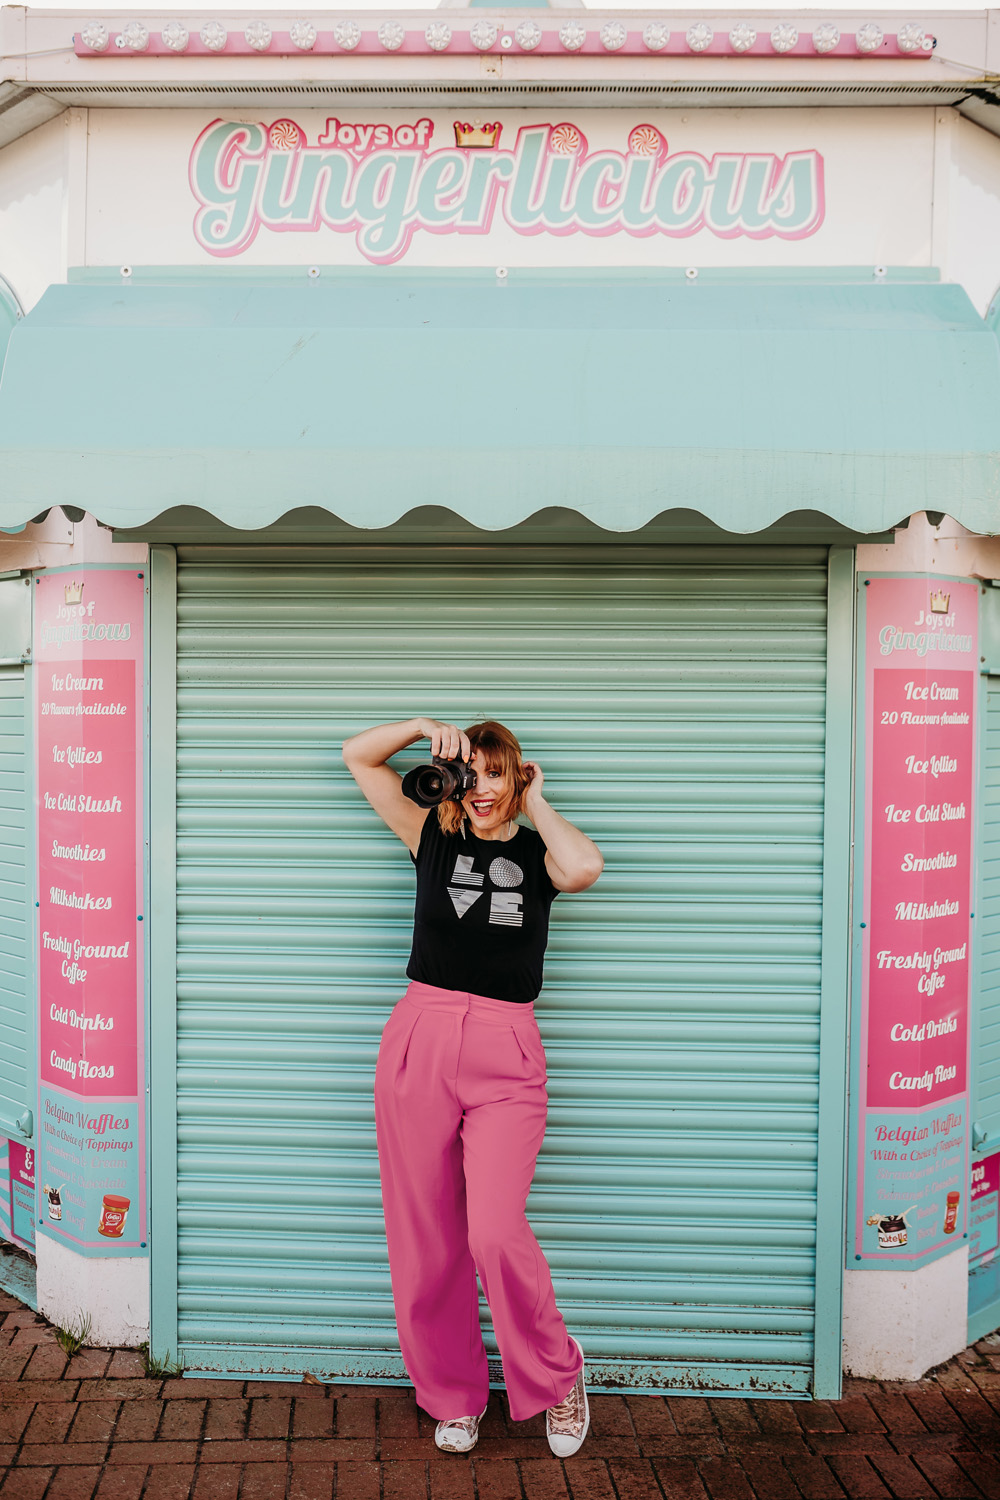 Cardiff Wedding Photographer - Charlie, a white woman with ginger hair, is holding a camera to her face and smiling, in front of a turquoise and pink building with a sign that reads 'Joys of Gingerlicious'